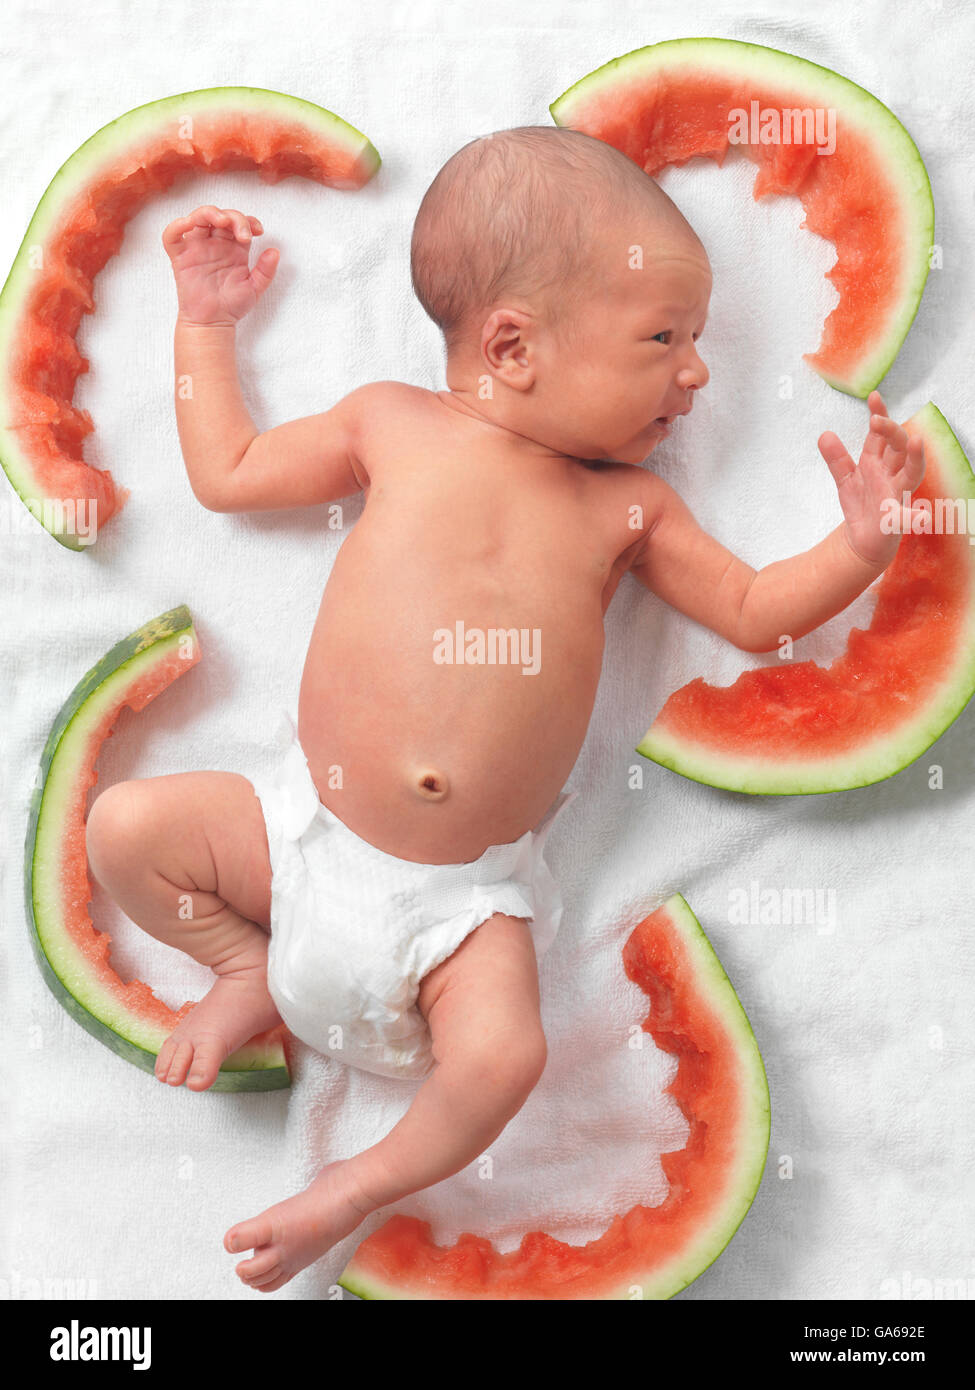 Newborn Baby In A Diaper Lying Down Amongst Watermelon Rinds Stock Photo Alamy